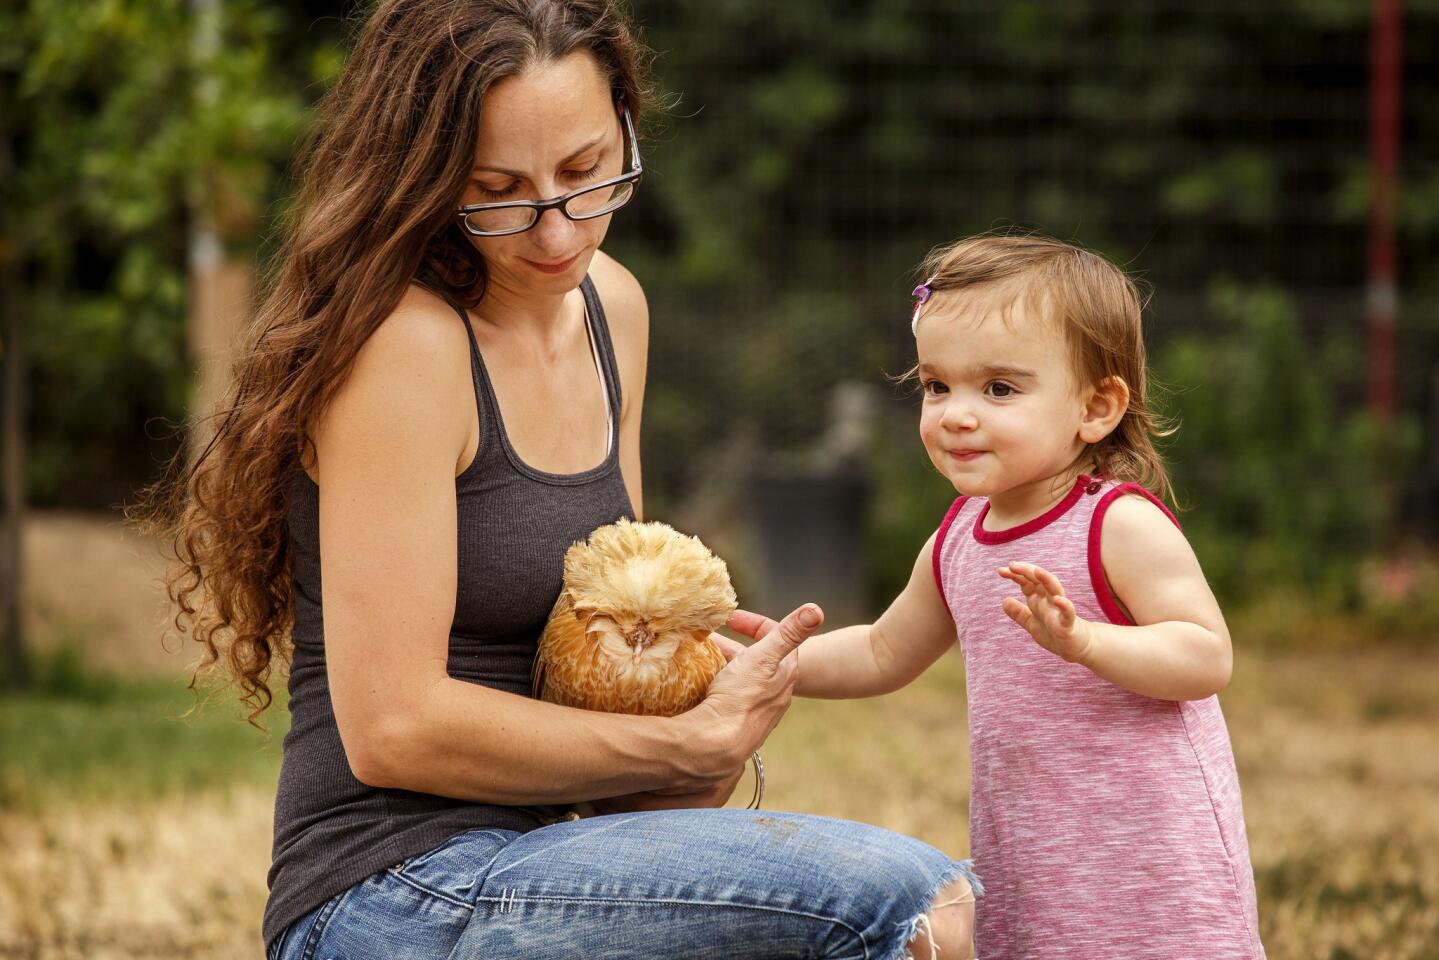 Dominique Salamone, left, and daughter Glory, 1, pet a rooster in their Northridge backyard.